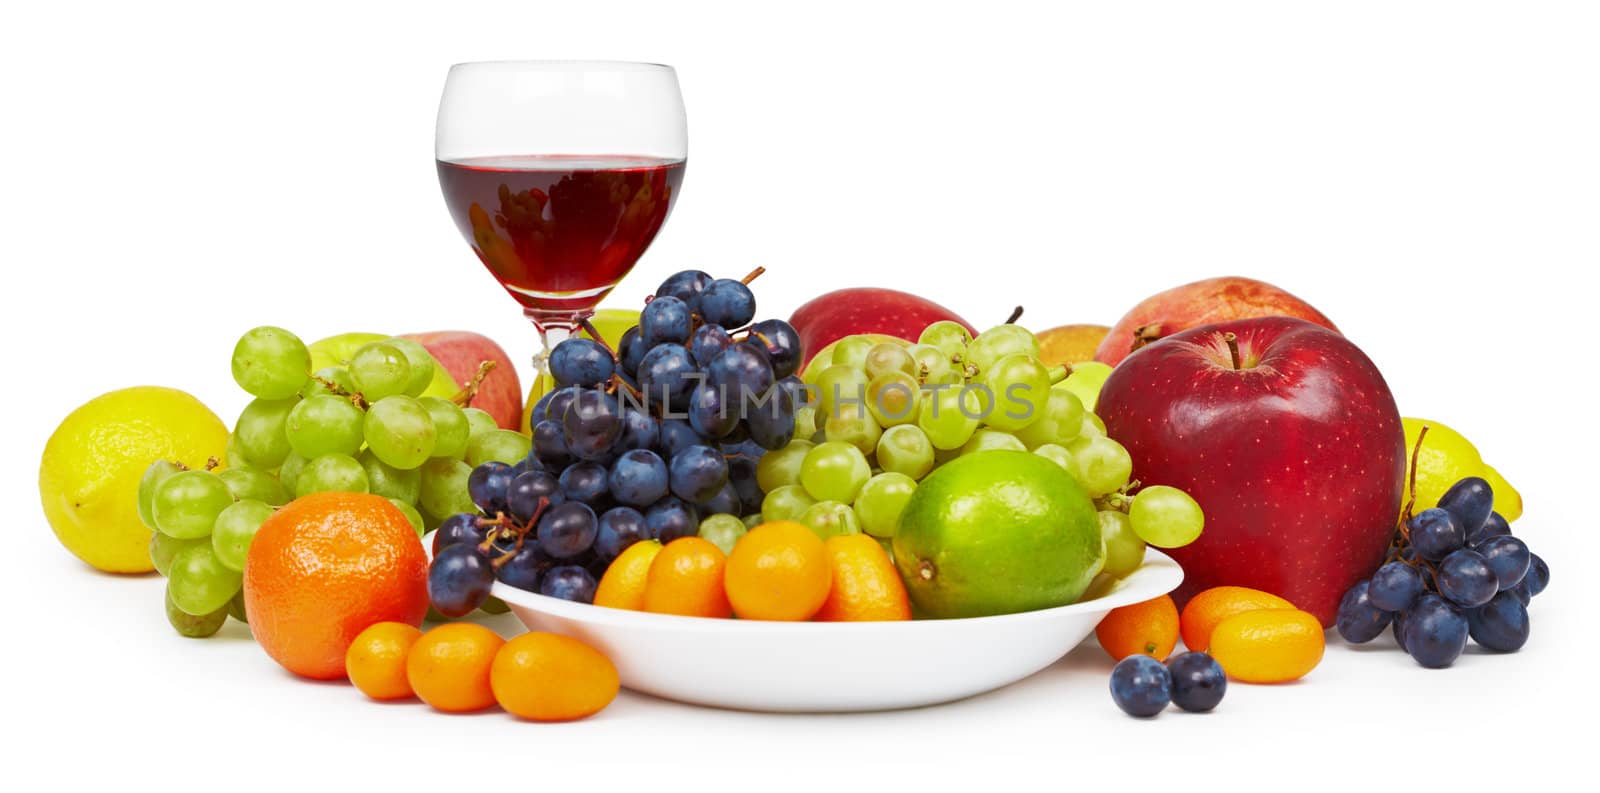 The big still-life with fruit and a wine glass on a white background